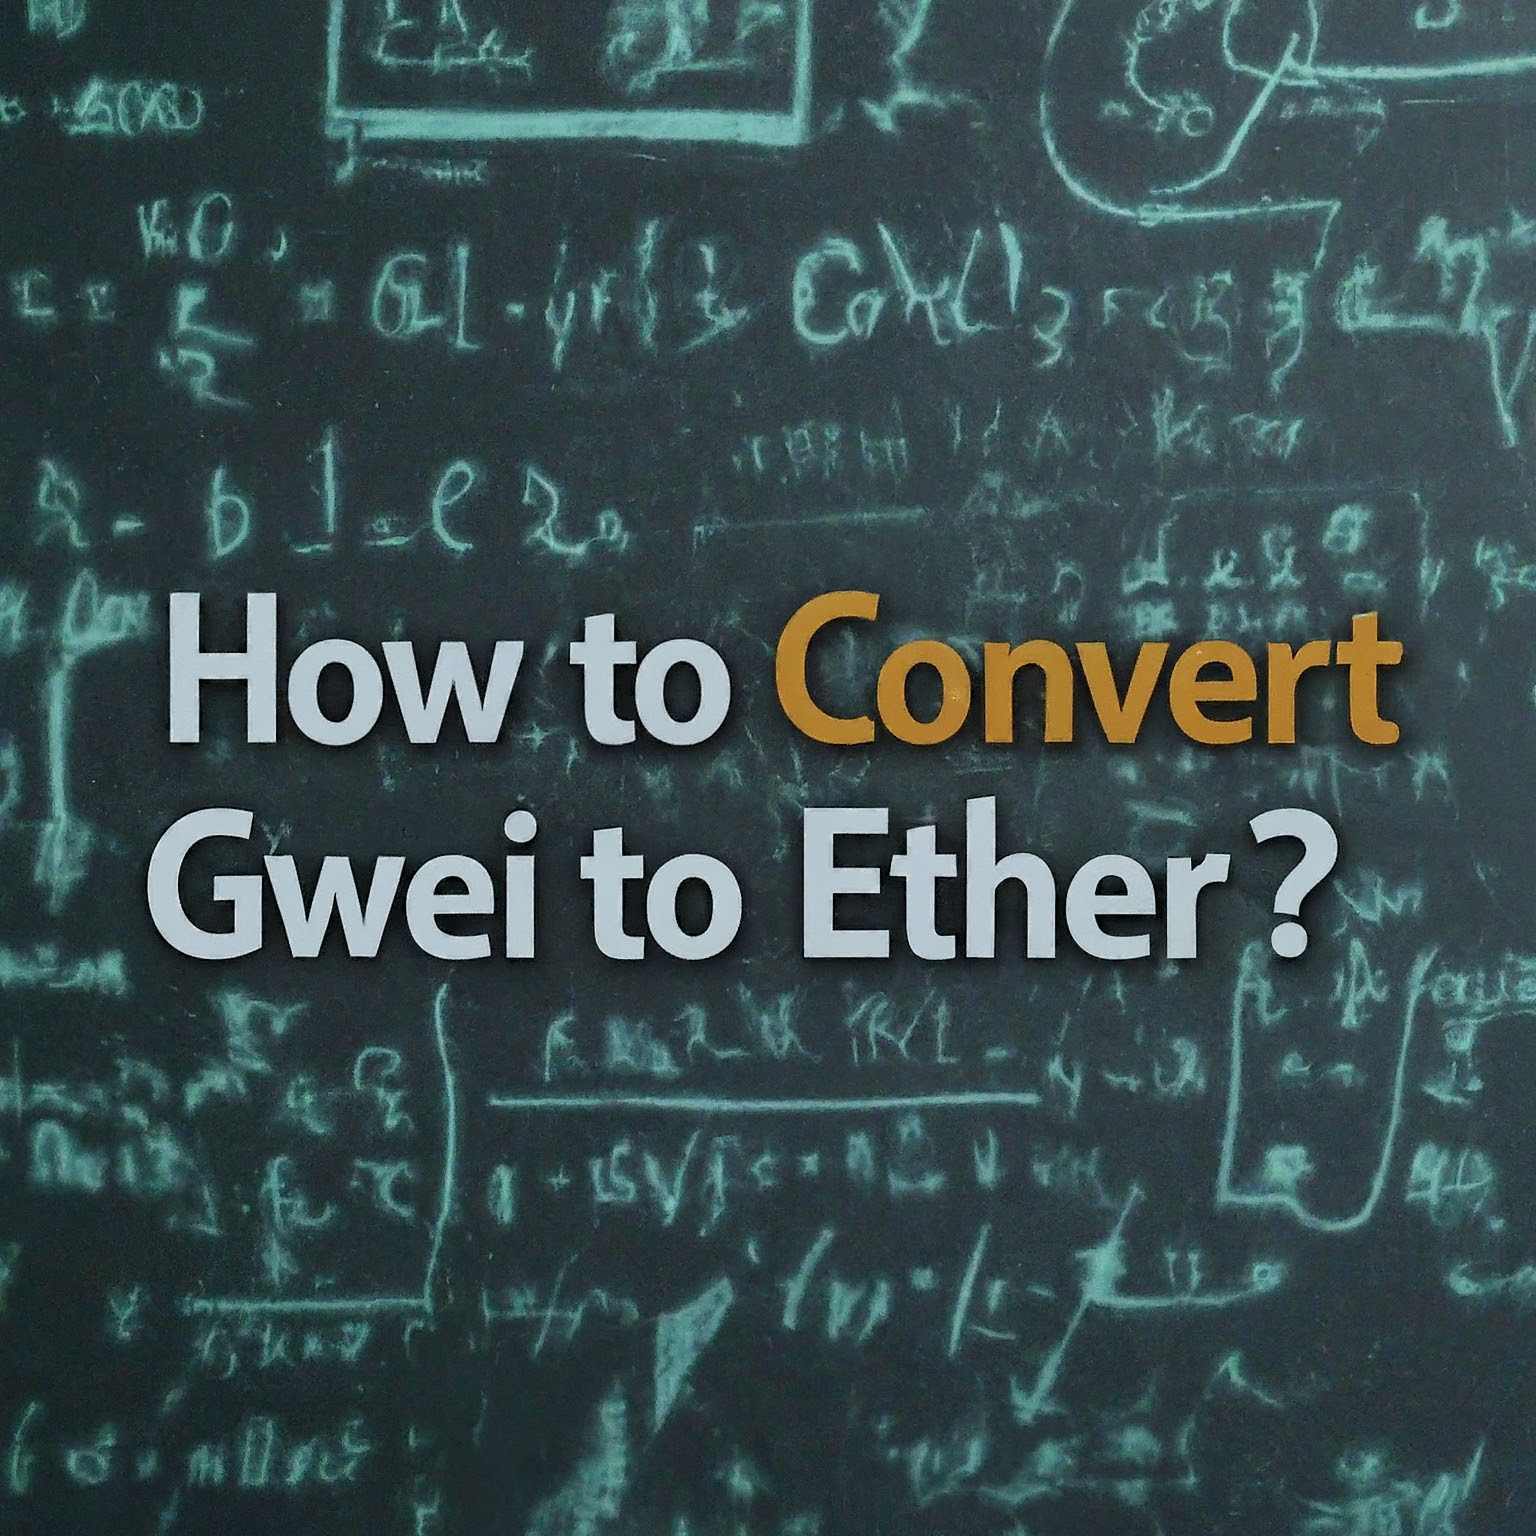 How to Convert Gwei to Ether